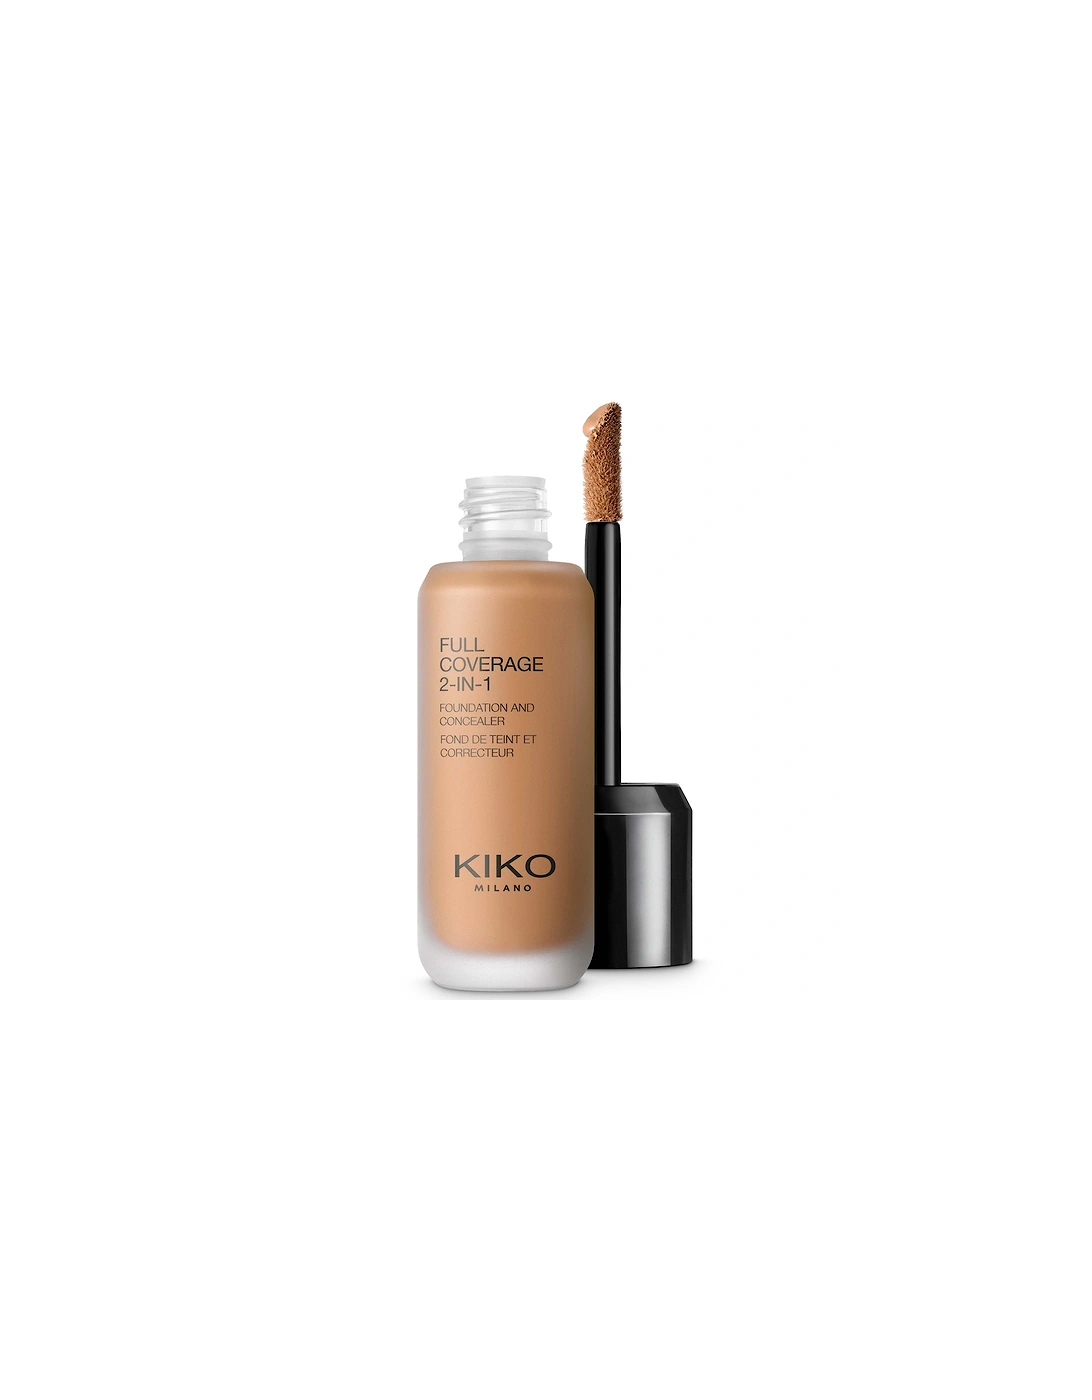 Full Coverage 2-in-1 Foundation and Concealer 25ml - 105 Warm Beige, 2 of 1